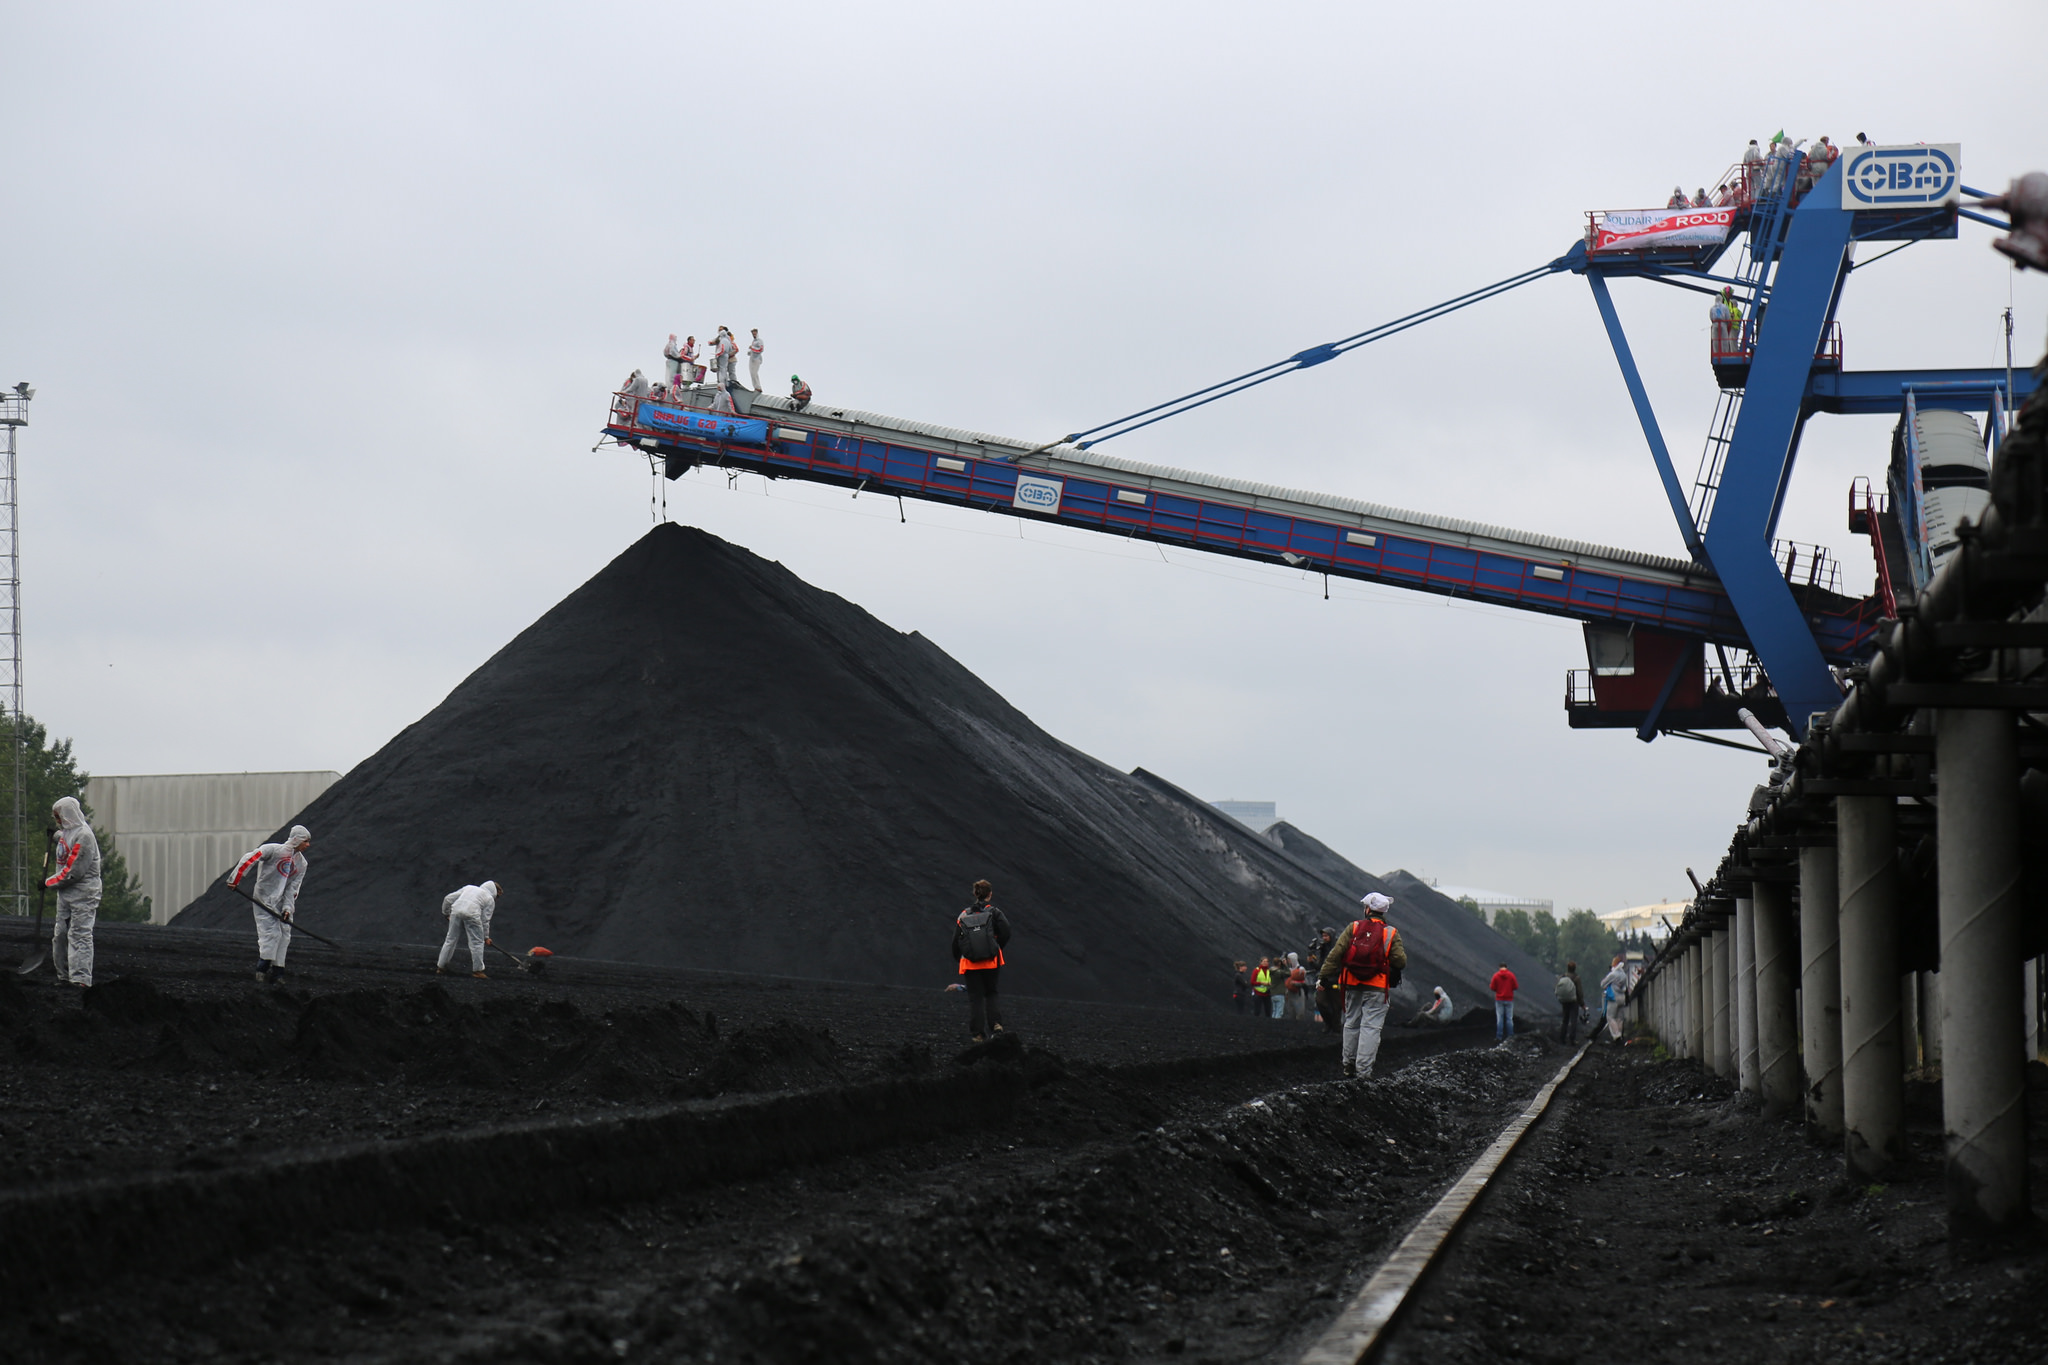 Image credit: Code Rood action at the OBA Coal Terminal in Amsterdam, CC BY-SA 2.0 (https://creativecommons.org/licenses/by-sa/2.0/)